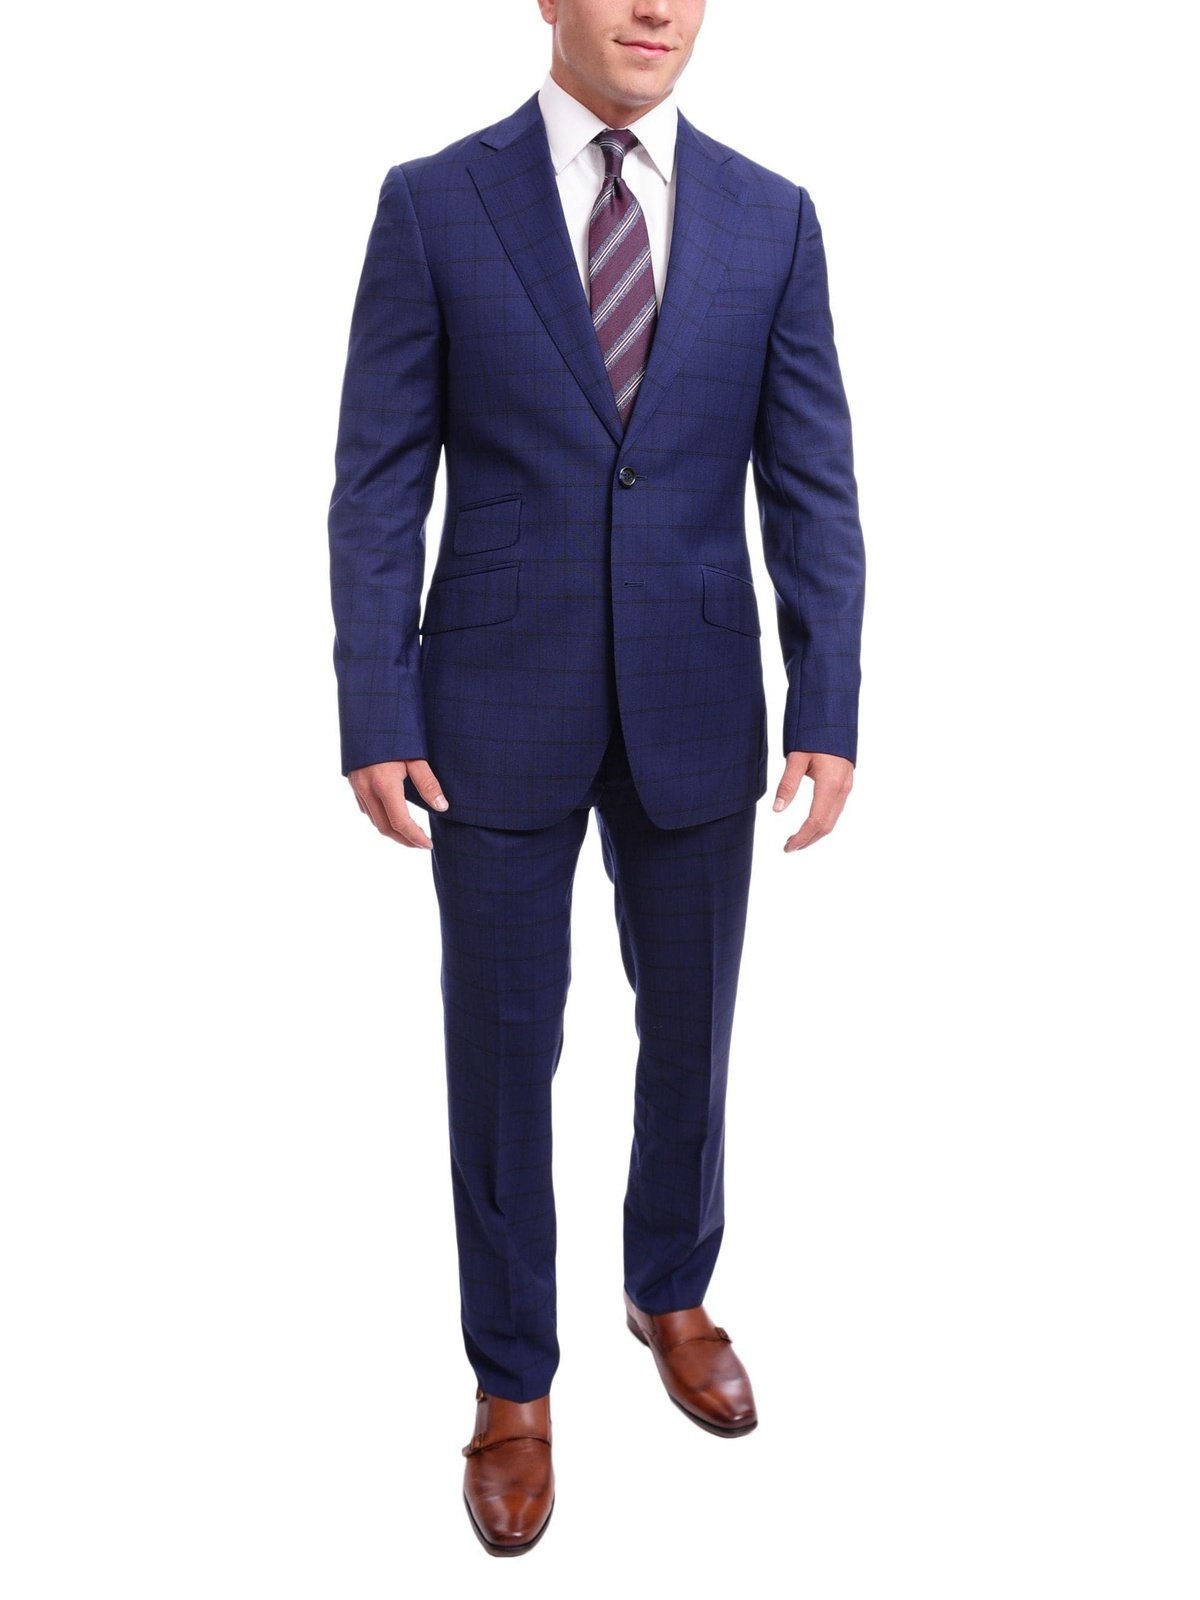 Napoli TWO PIECE SUITS Napoli Slim Fit Blue Plaid Windowpane Two Button Half Canvassed 100% Wool Suit